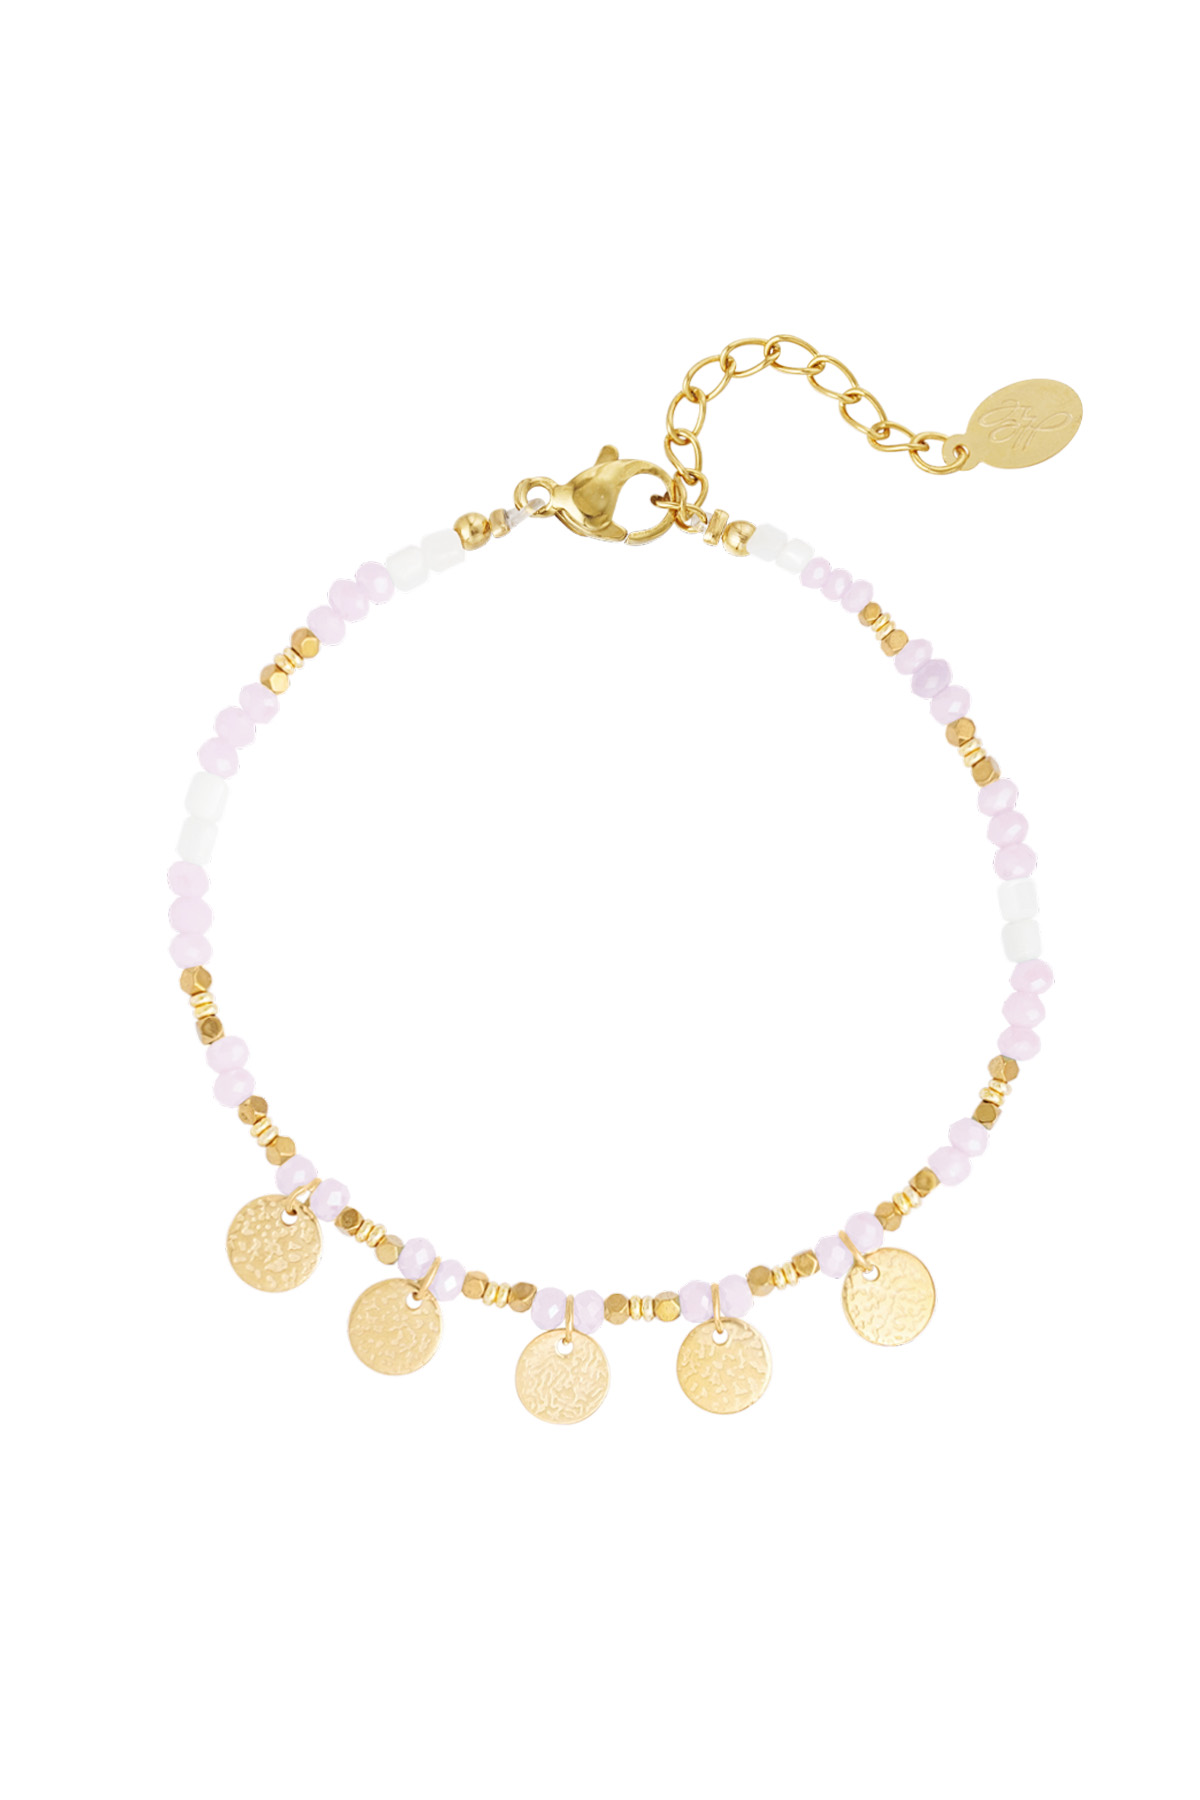 Bead bracelet with coin charms - pale pink